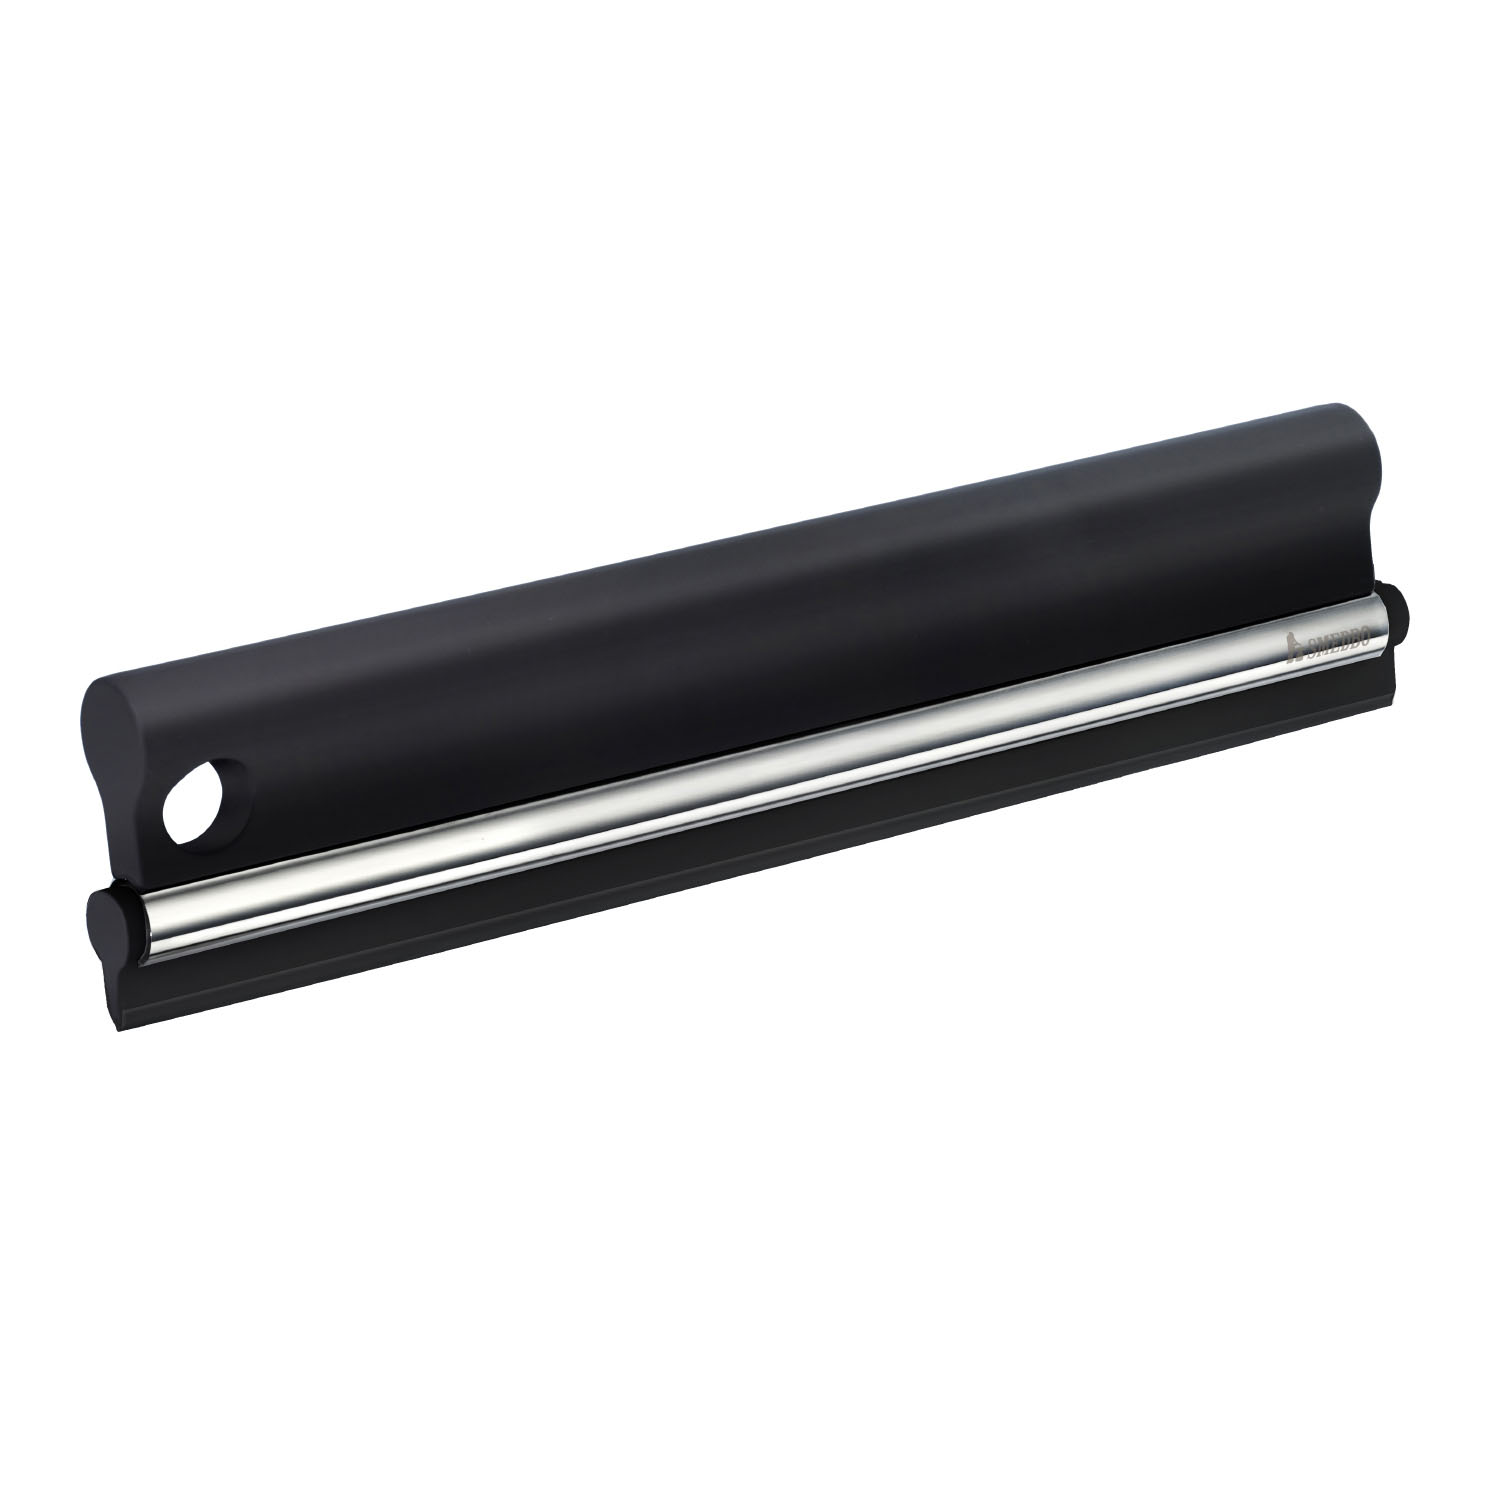 Polished Chrome/ABS Smedbo Sideline Shower Squeegee 